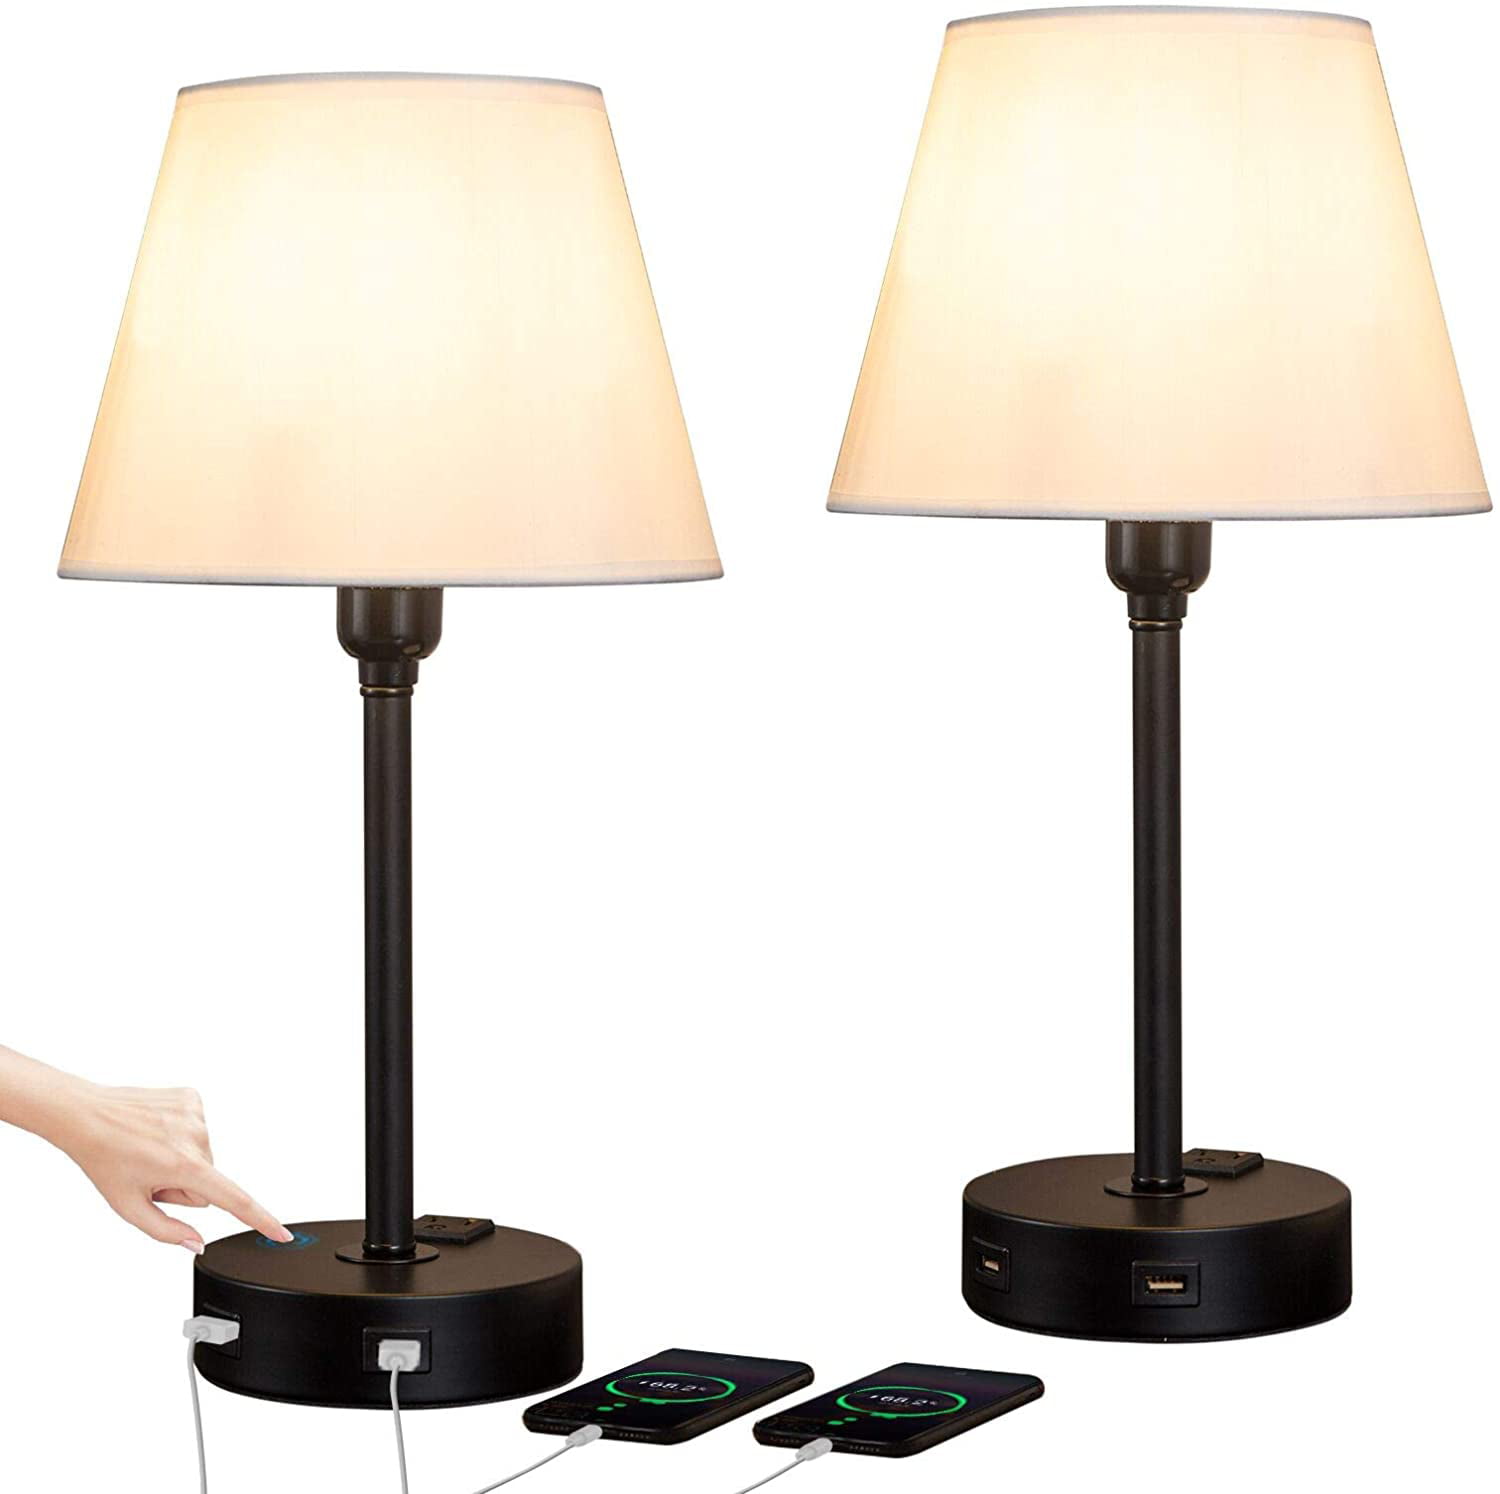 Zeefo Touch Control Table Lamp Built In, Tap Table Lamps